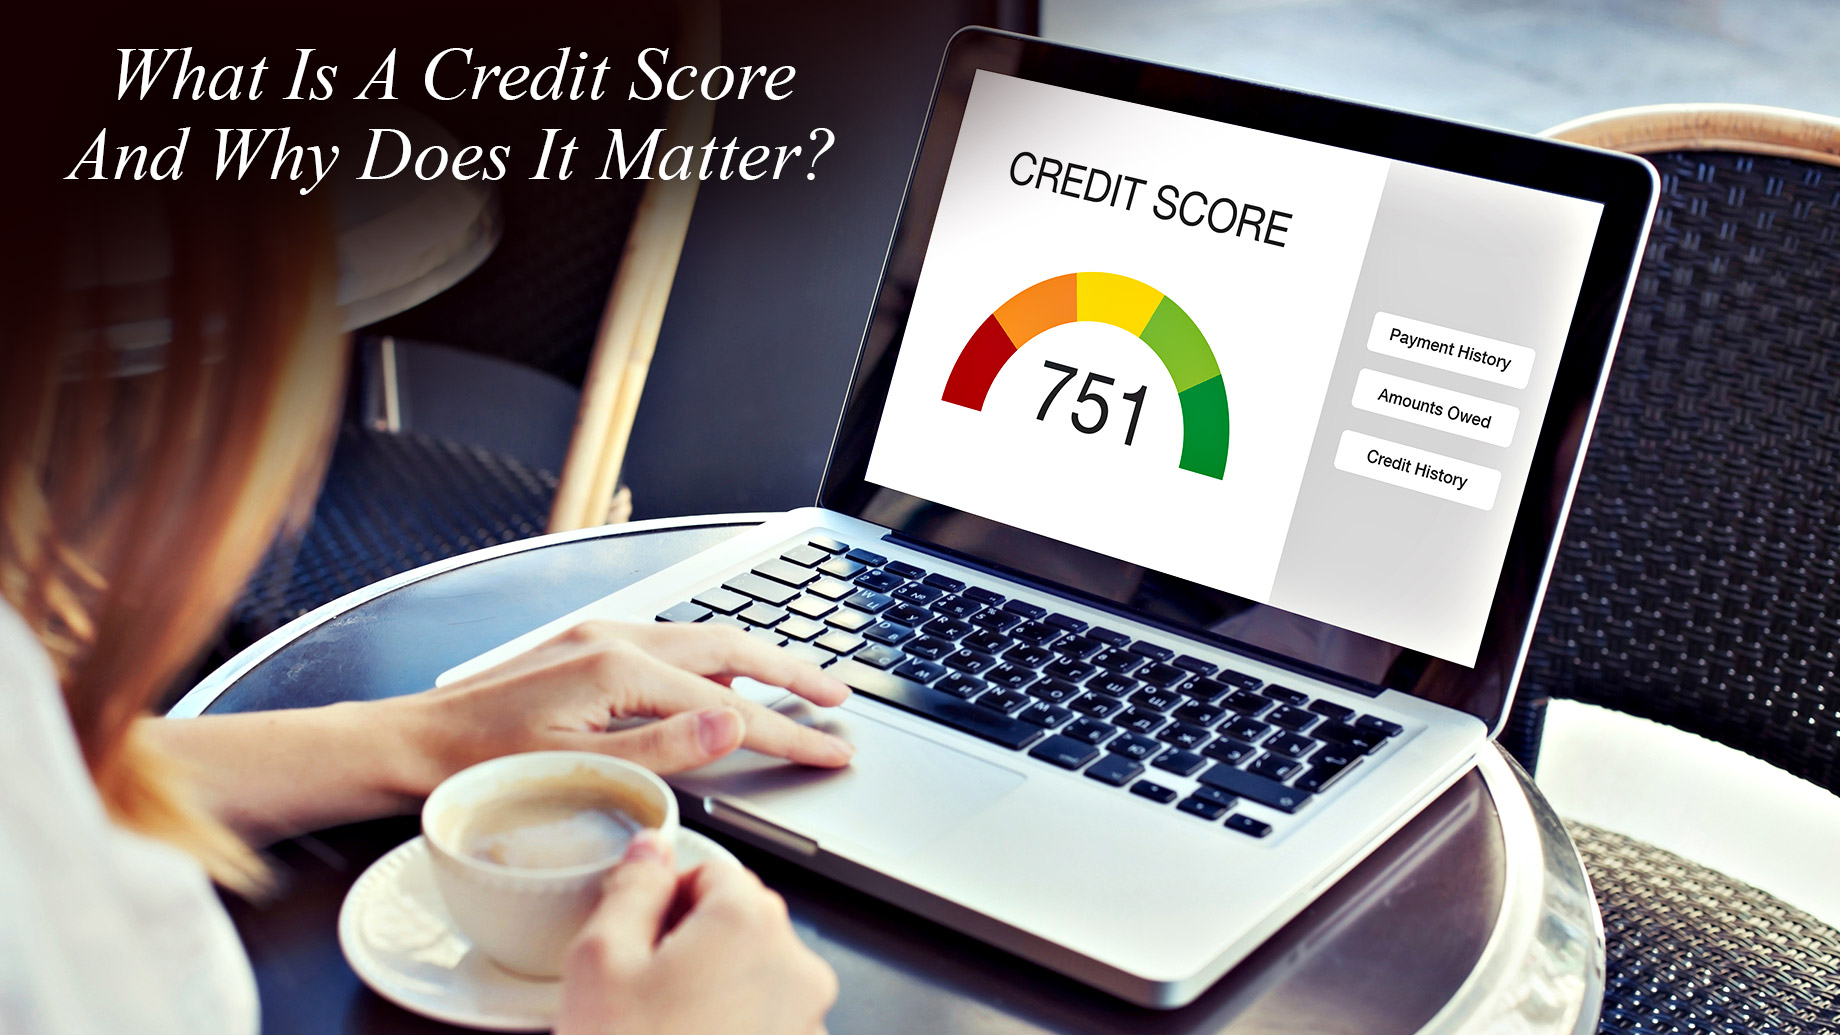 What Is A Credit Score And Why Does It Matter?